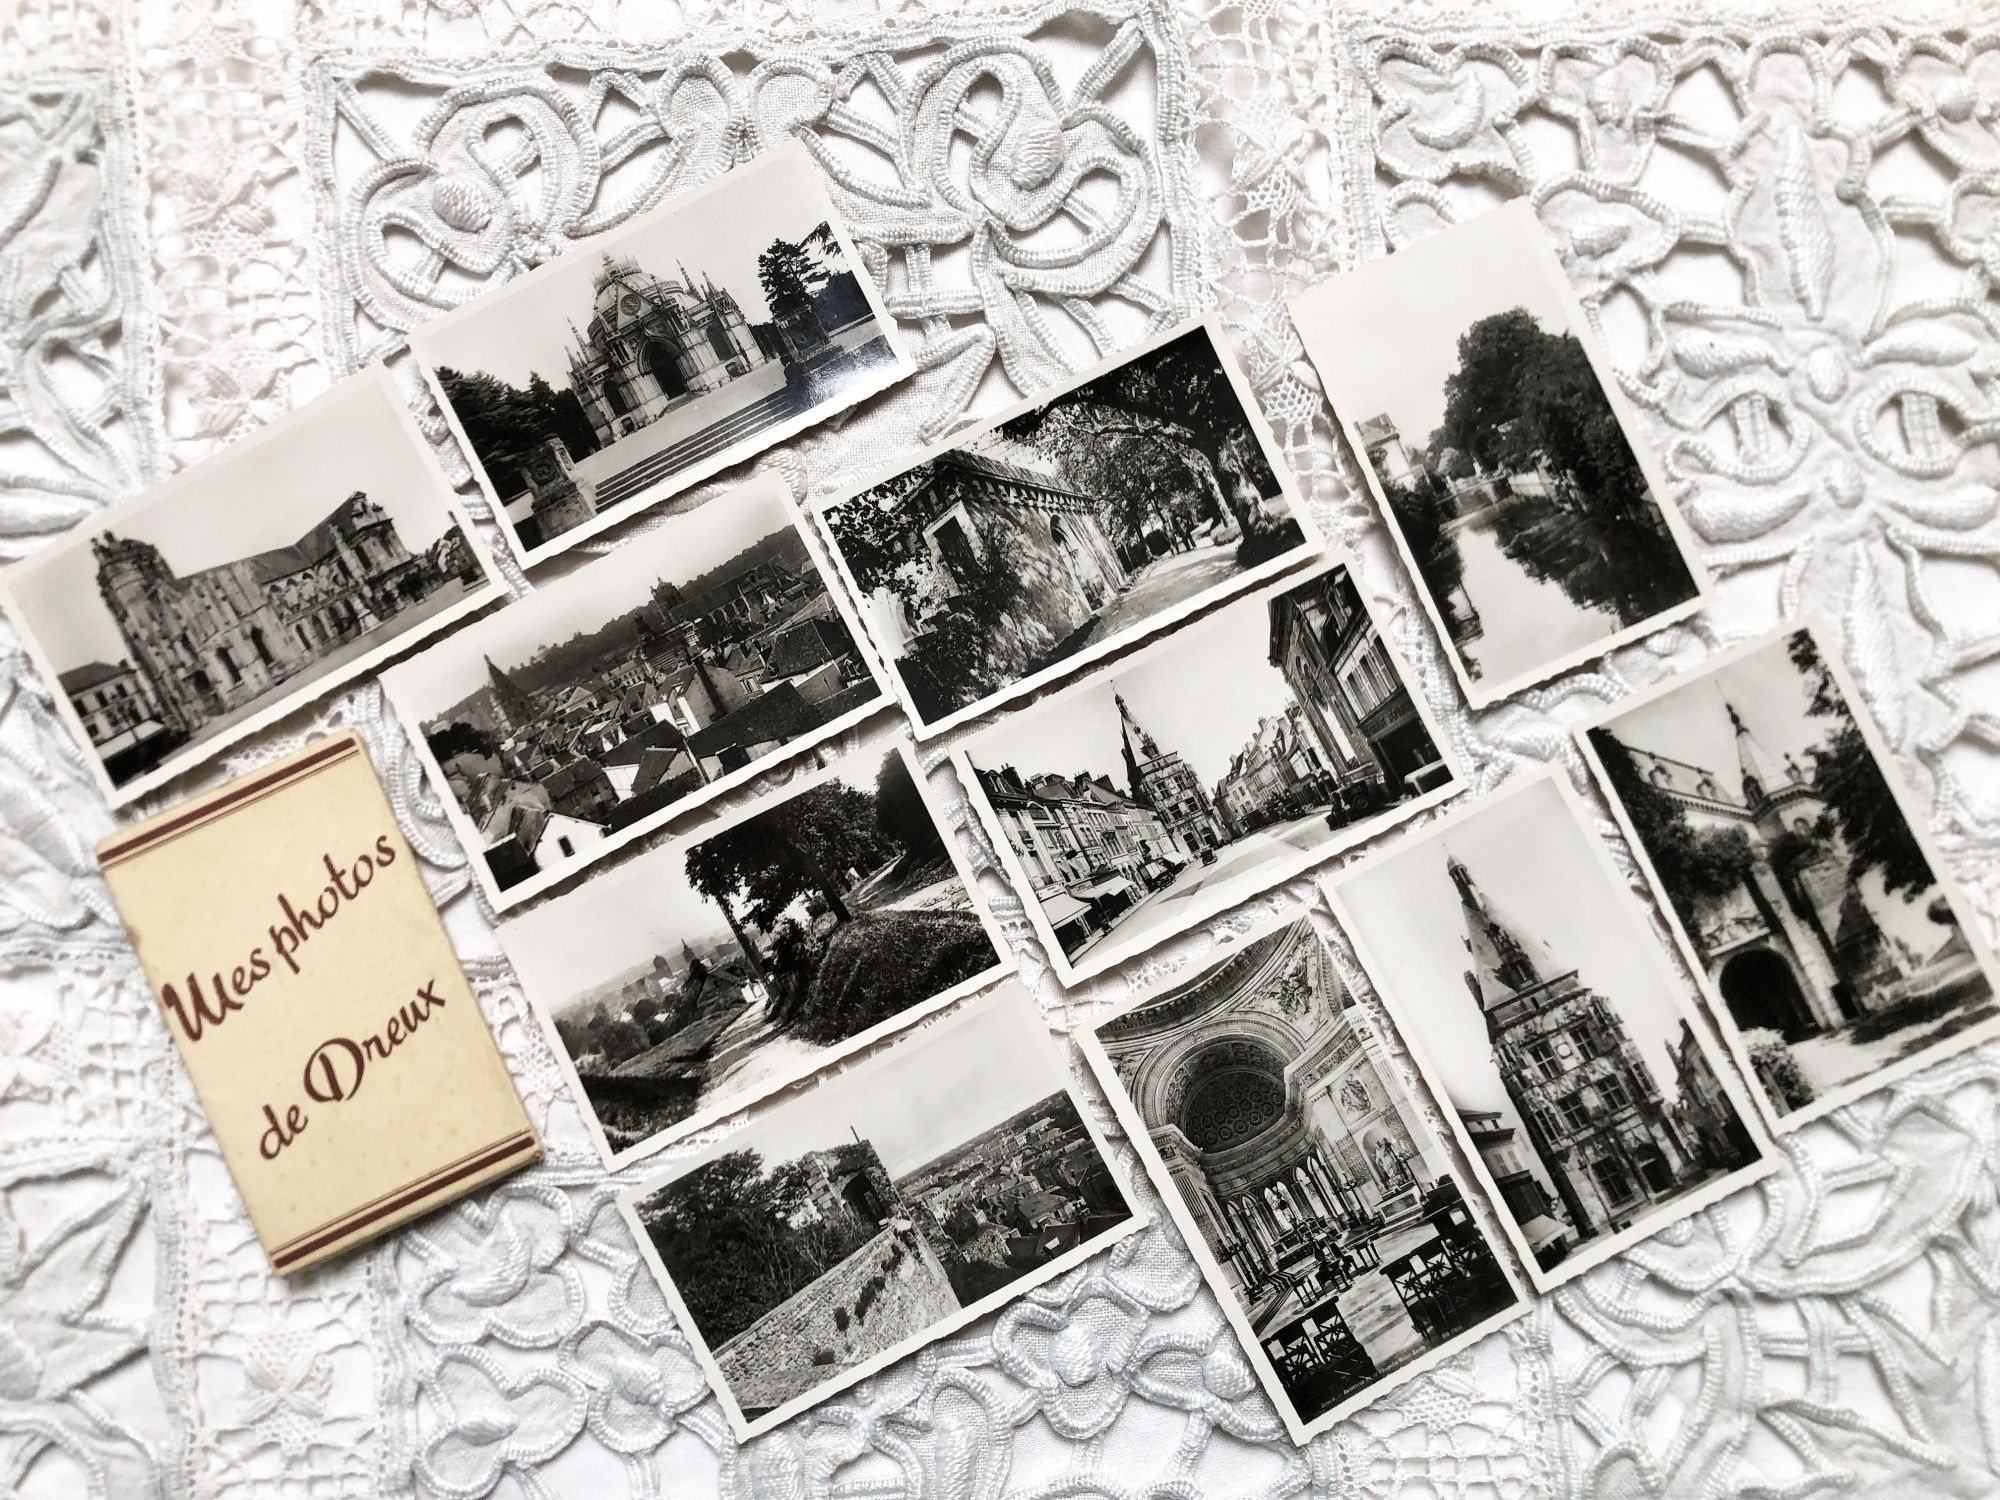 Set of 11 photos of the city of Dreux (France) in the 1950s